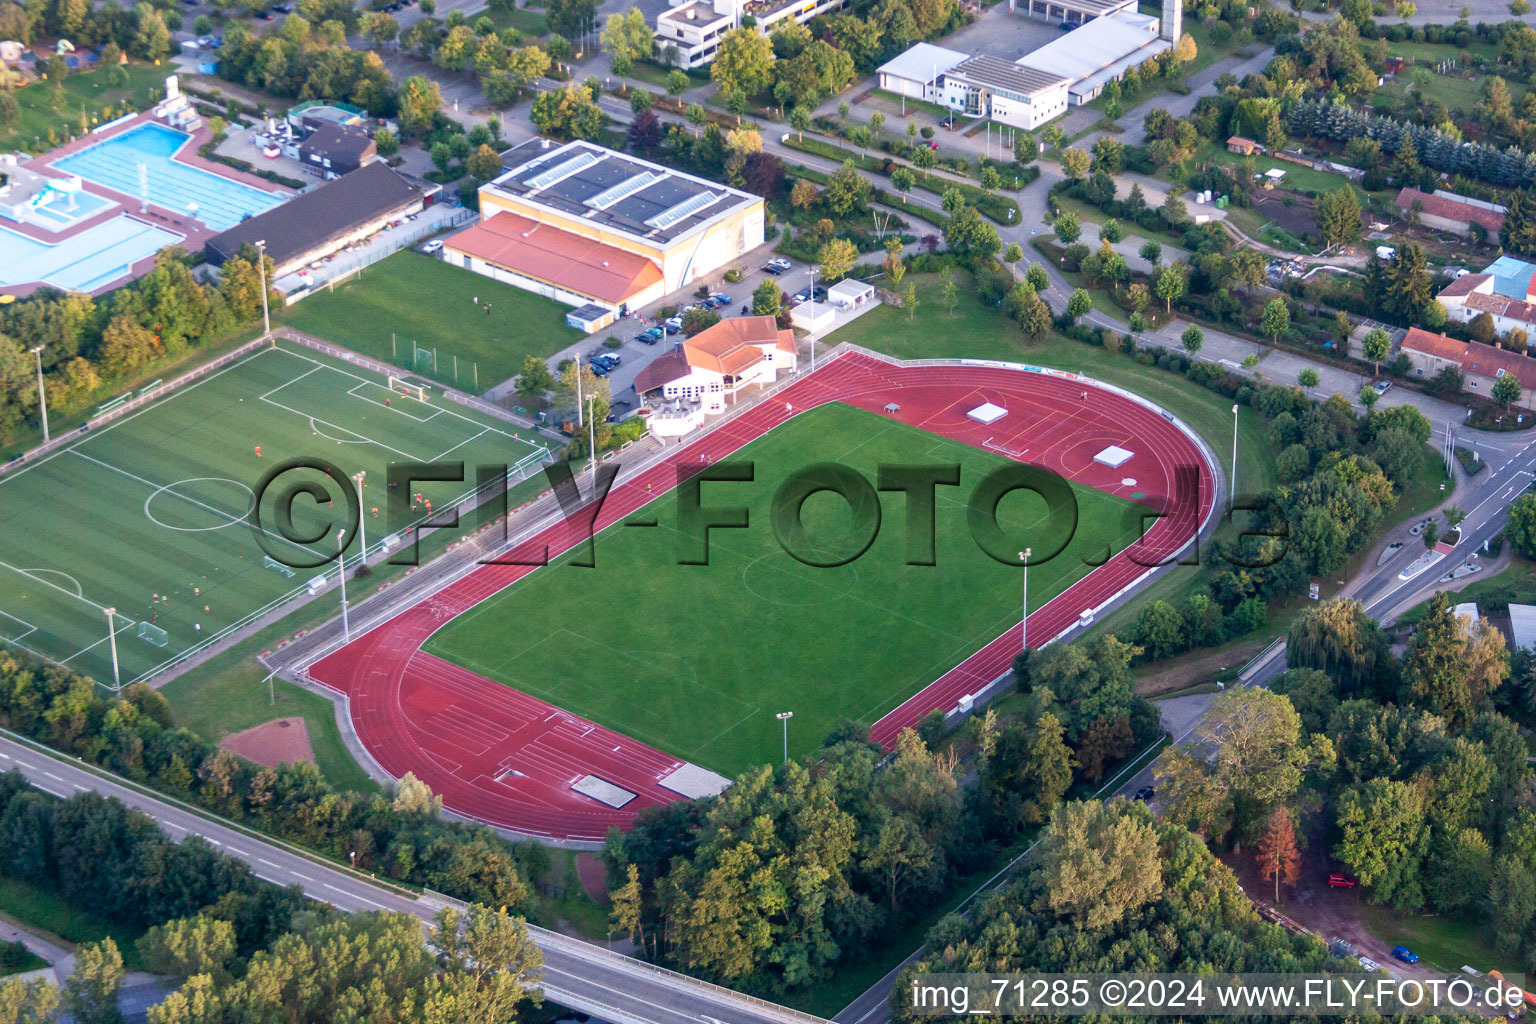 Aerial view of Queichtal Stadium in Offenbach an der Queich in the state Rhineland-Palatinate, Germany